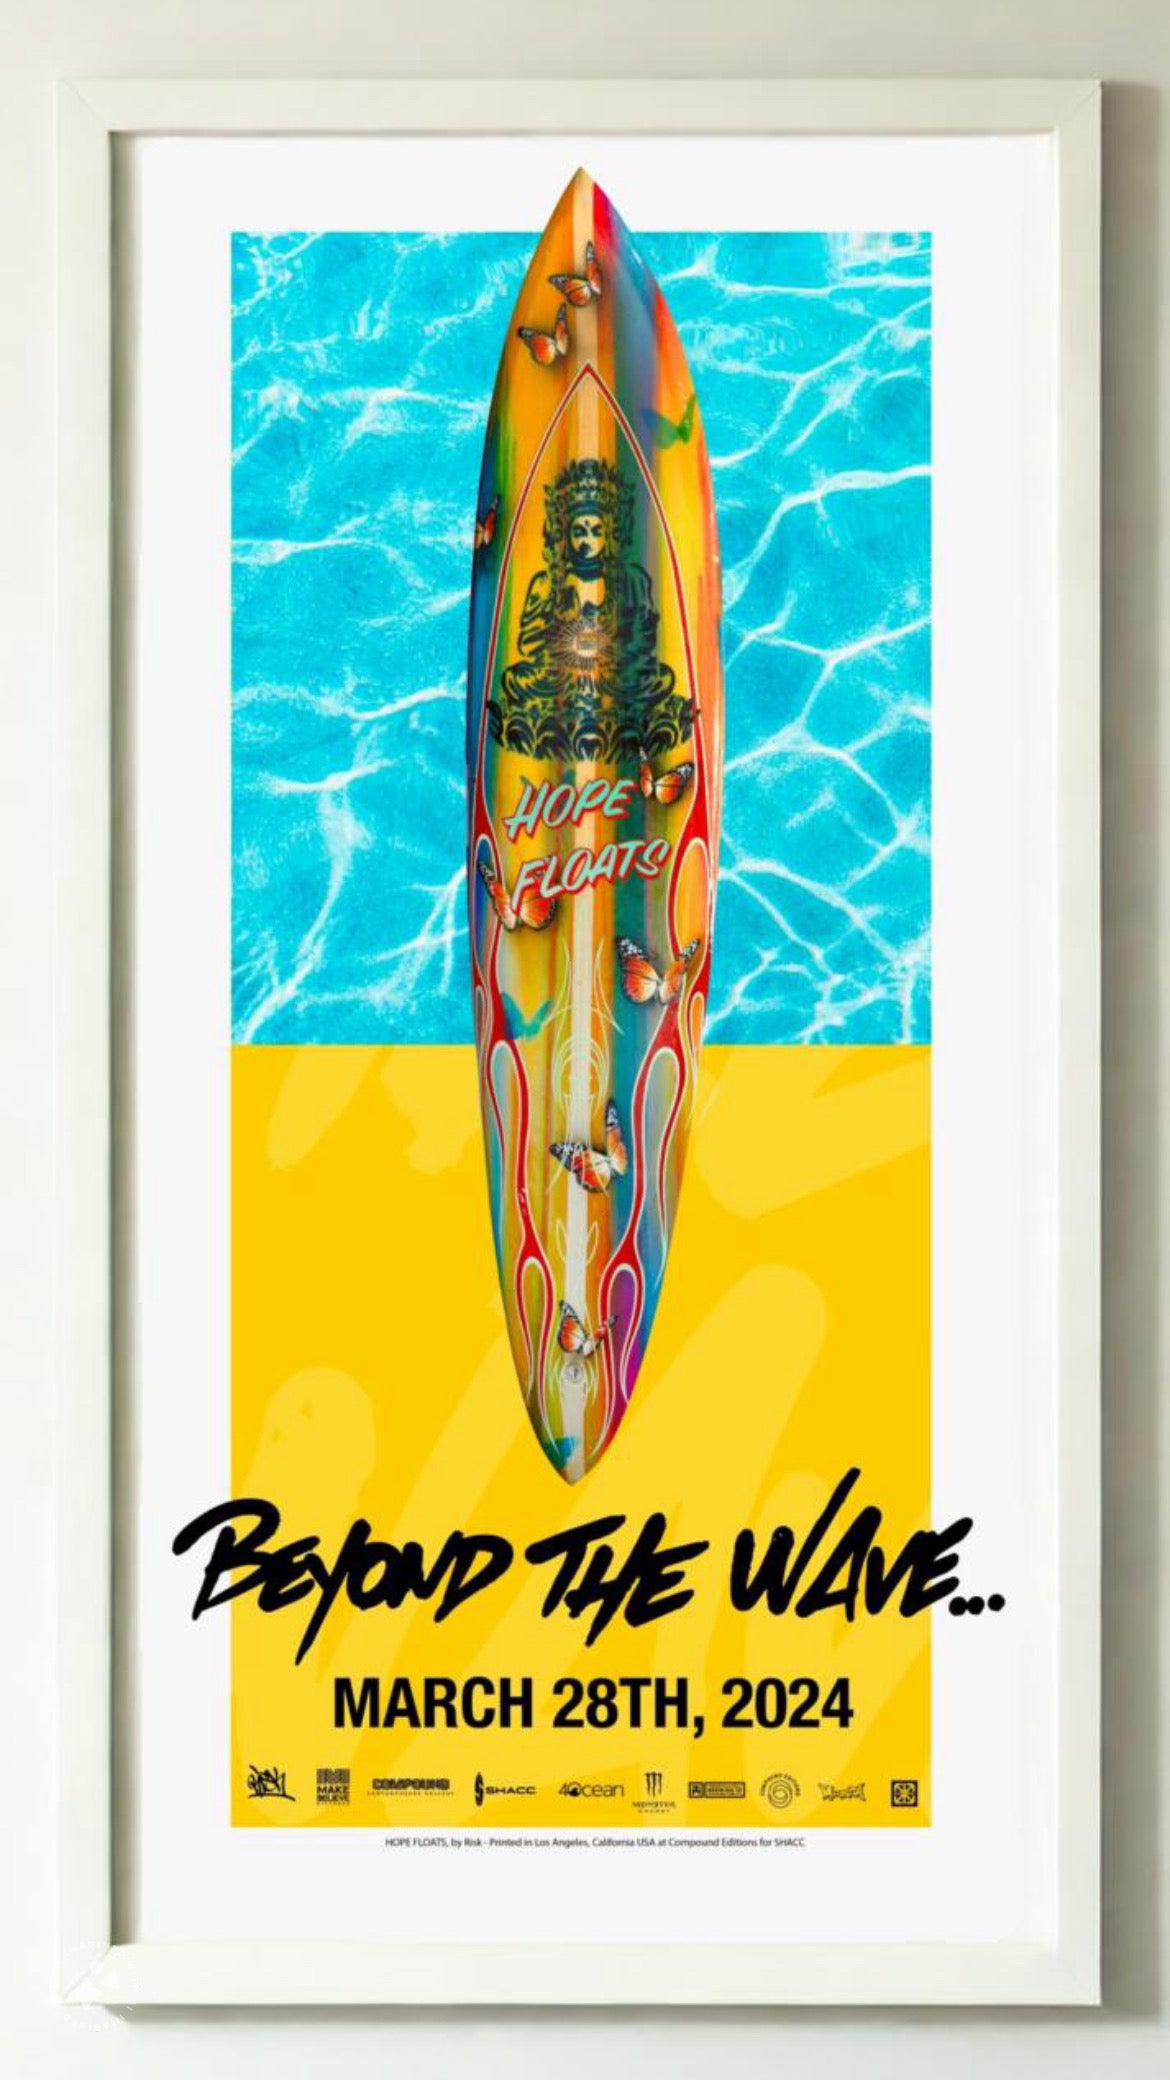 "Beyond the Wave" Show Poster - RISK Surfboard